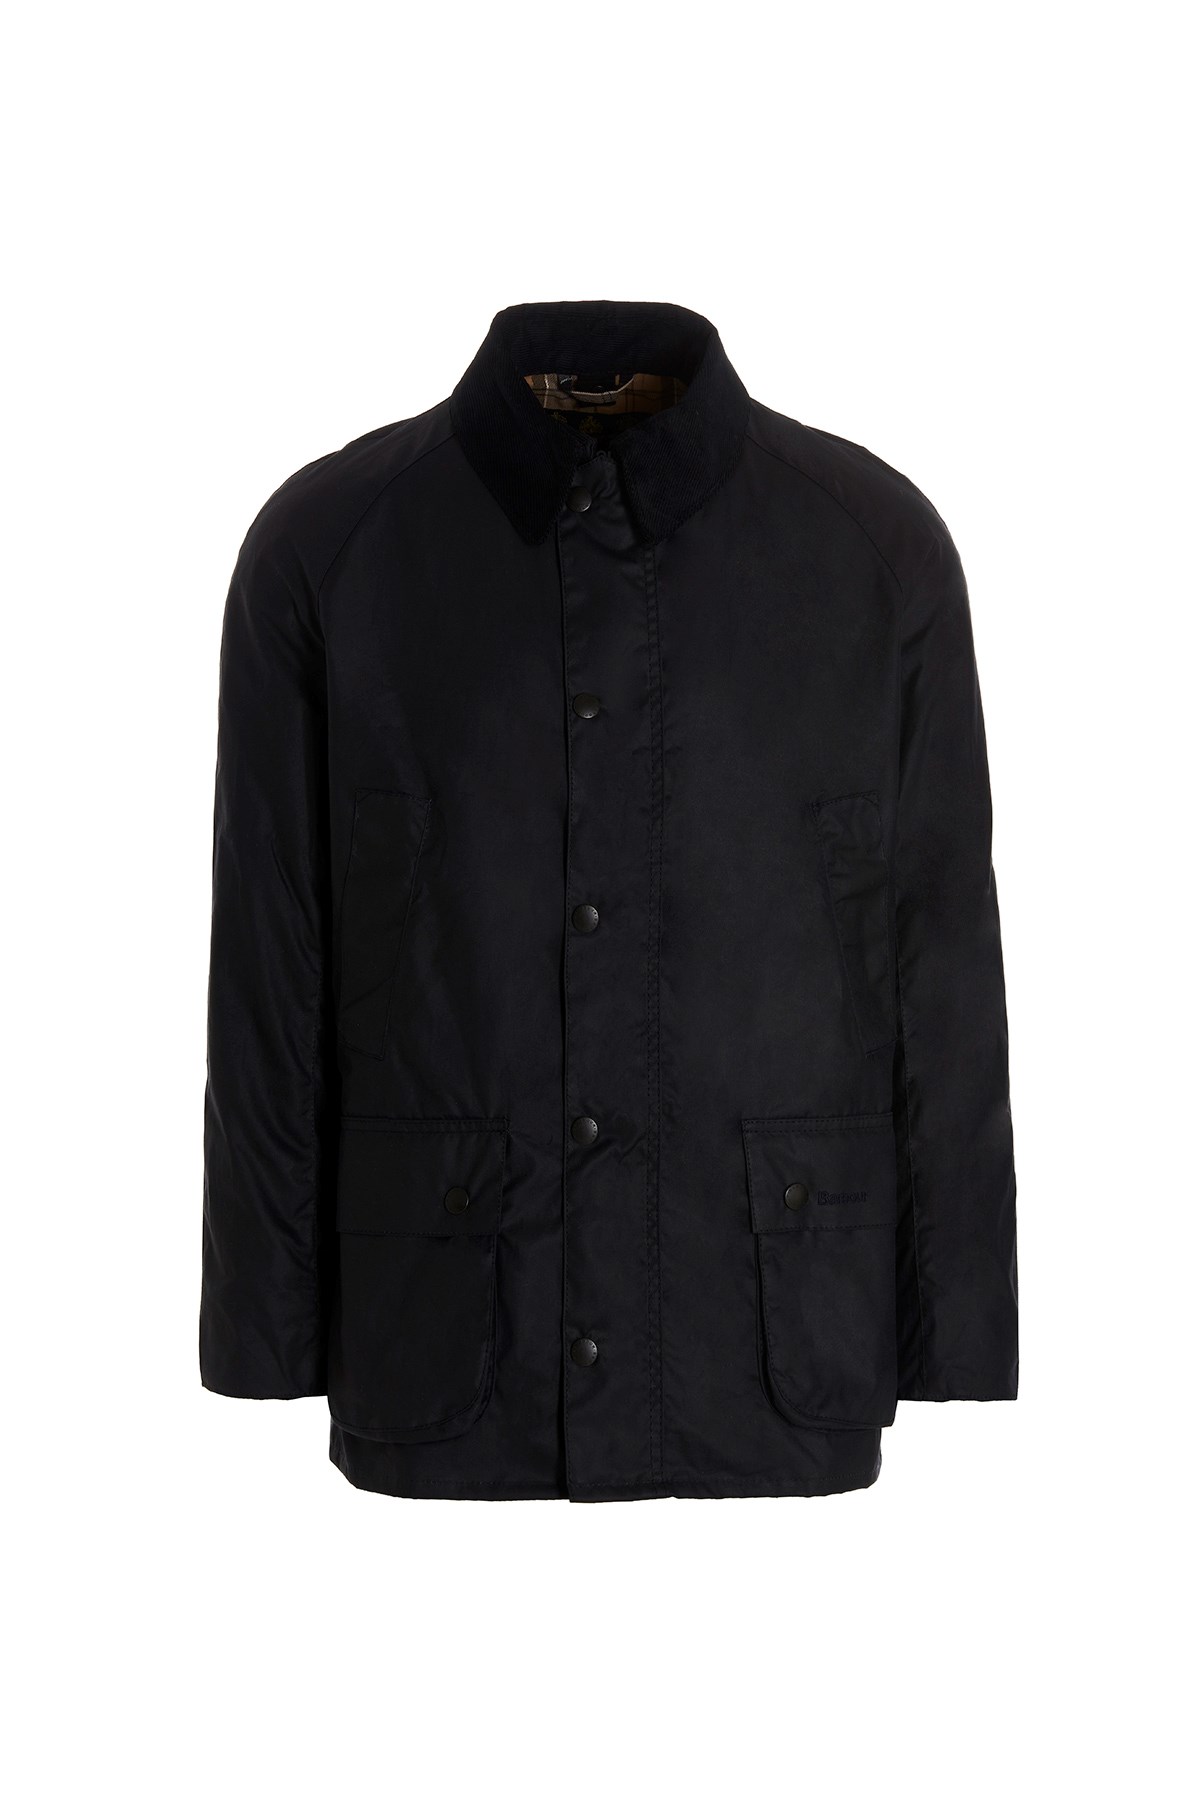 BARBOUR 'Ashby' Jacke